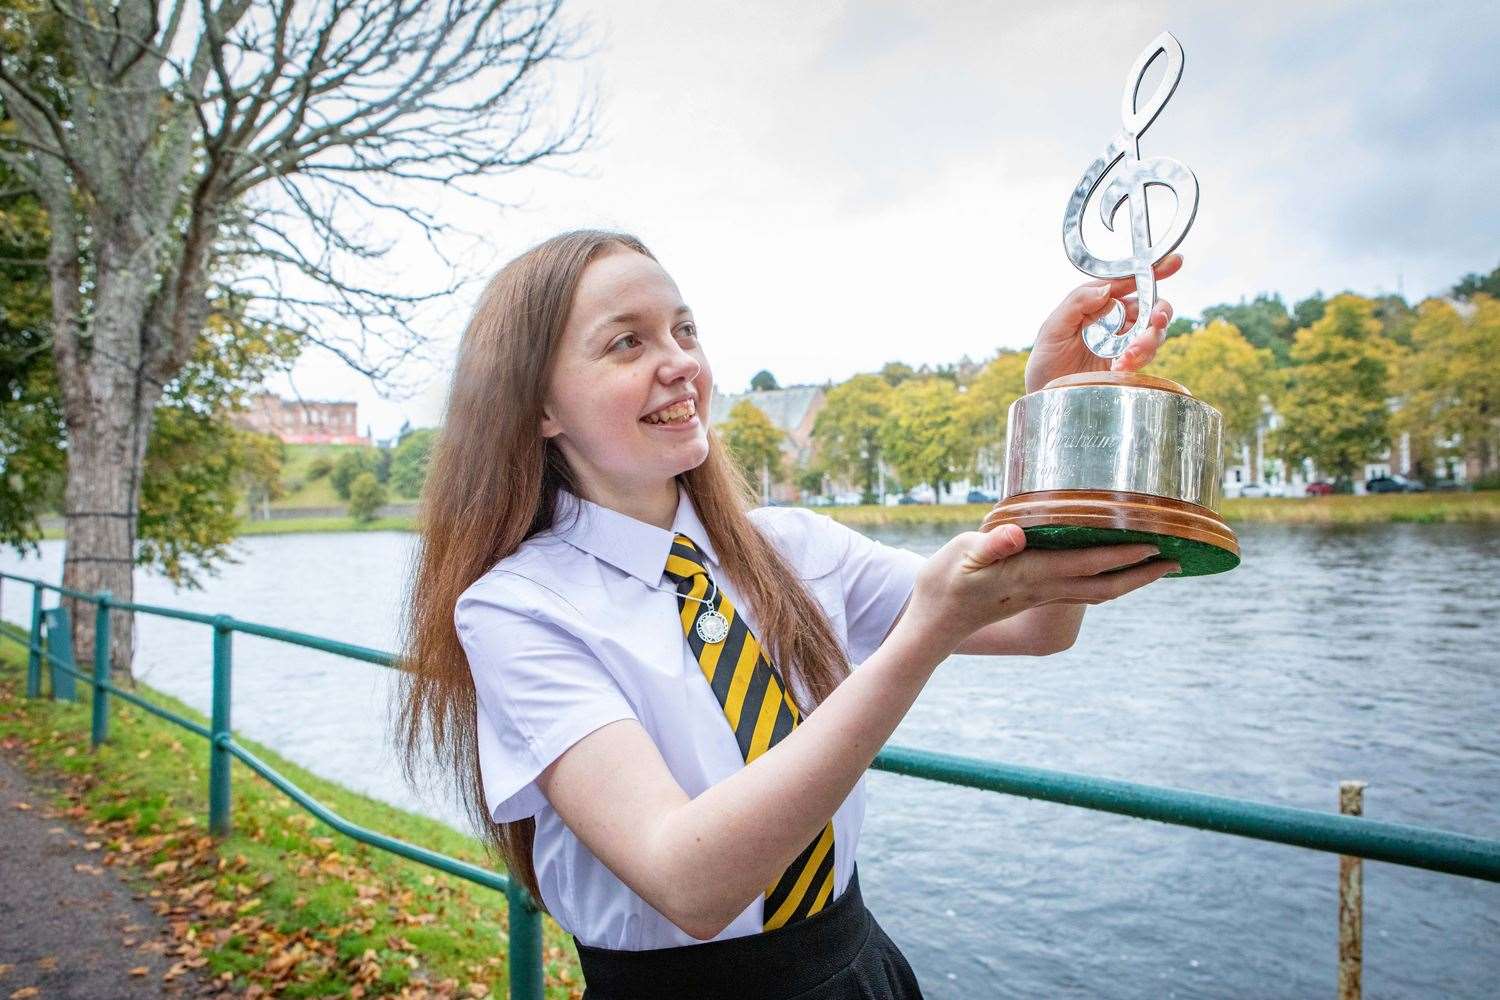 Naomi J Graham (15) from The Nicolson Institute School (Sgoil MhicNeacail) in Stornoway, Scotland, winner of the James C McPhee Memorial Medal at The Royal National Mòd 2021, in Inverness, Scotland.